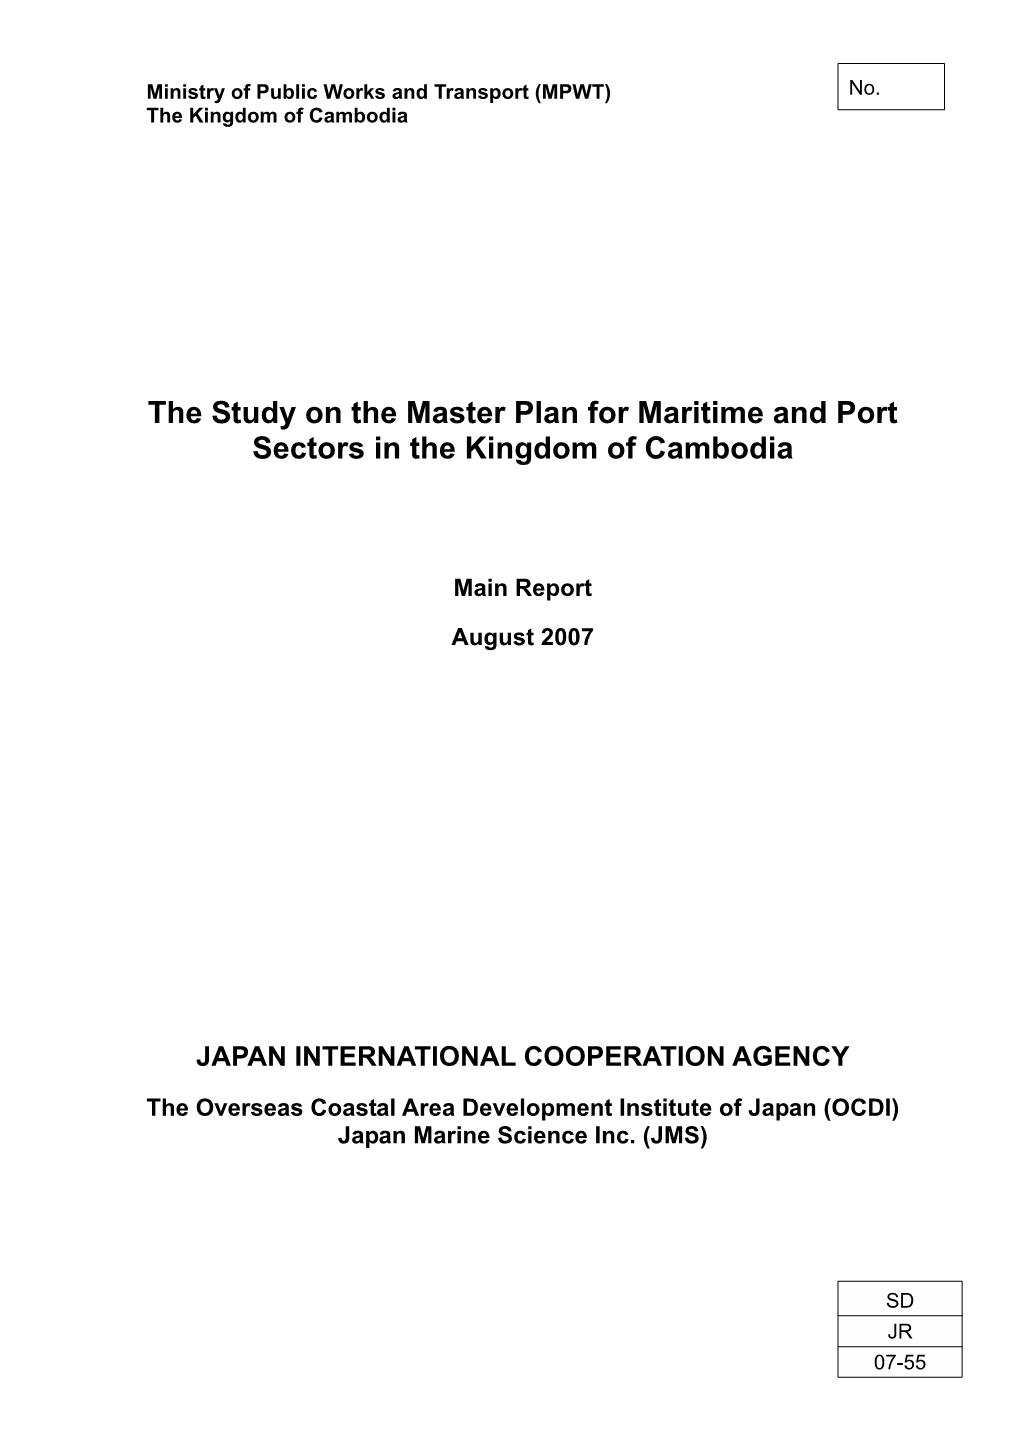 The Study on the Master Plan for Maritime and Port Sectors in the Kingdom of Cambodia